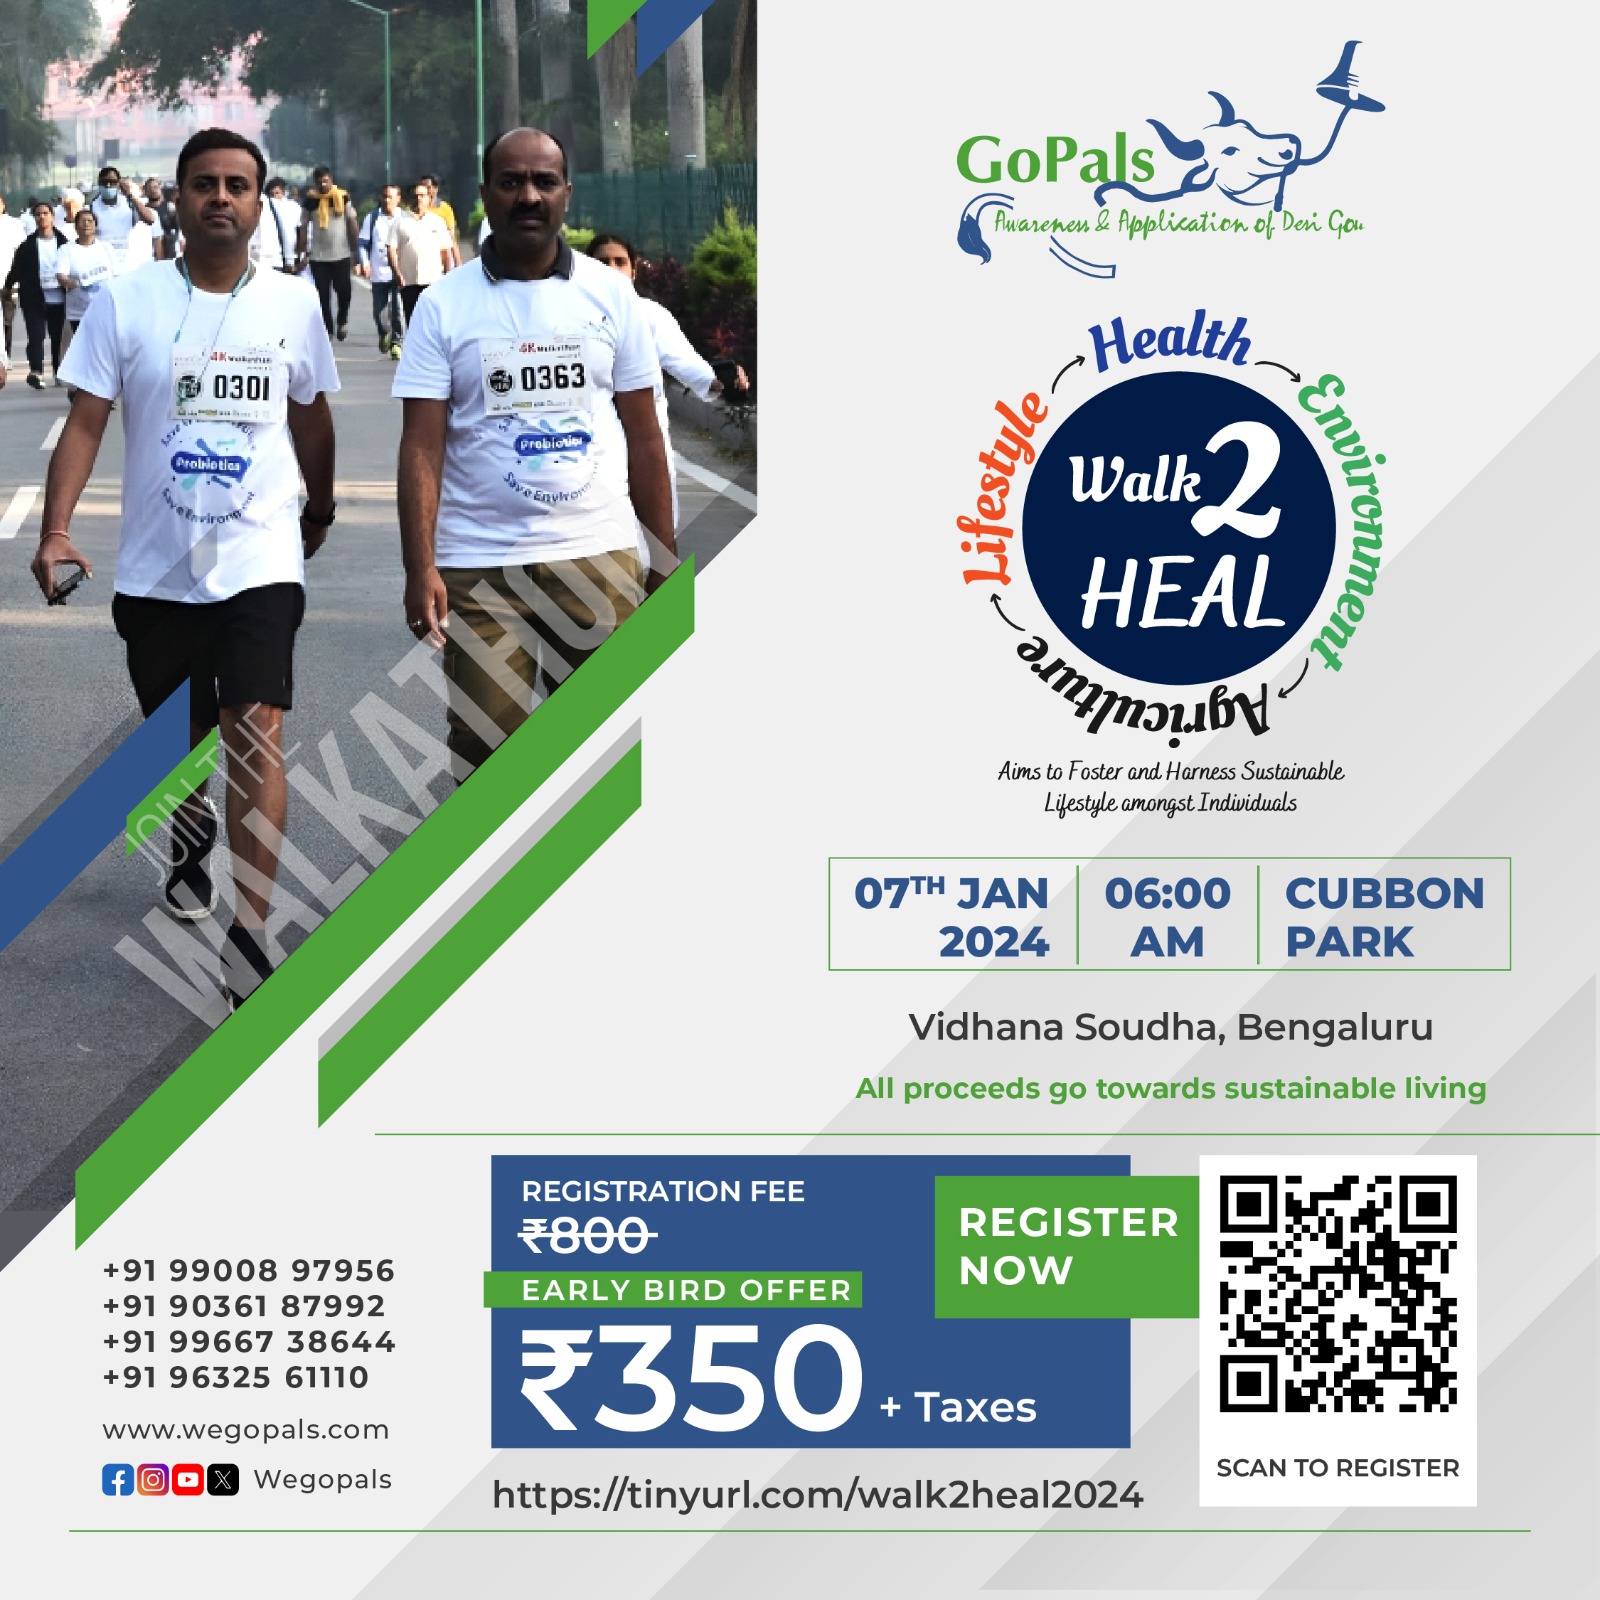 An e-poster of 'Walk to Heal' organized by GoPals.